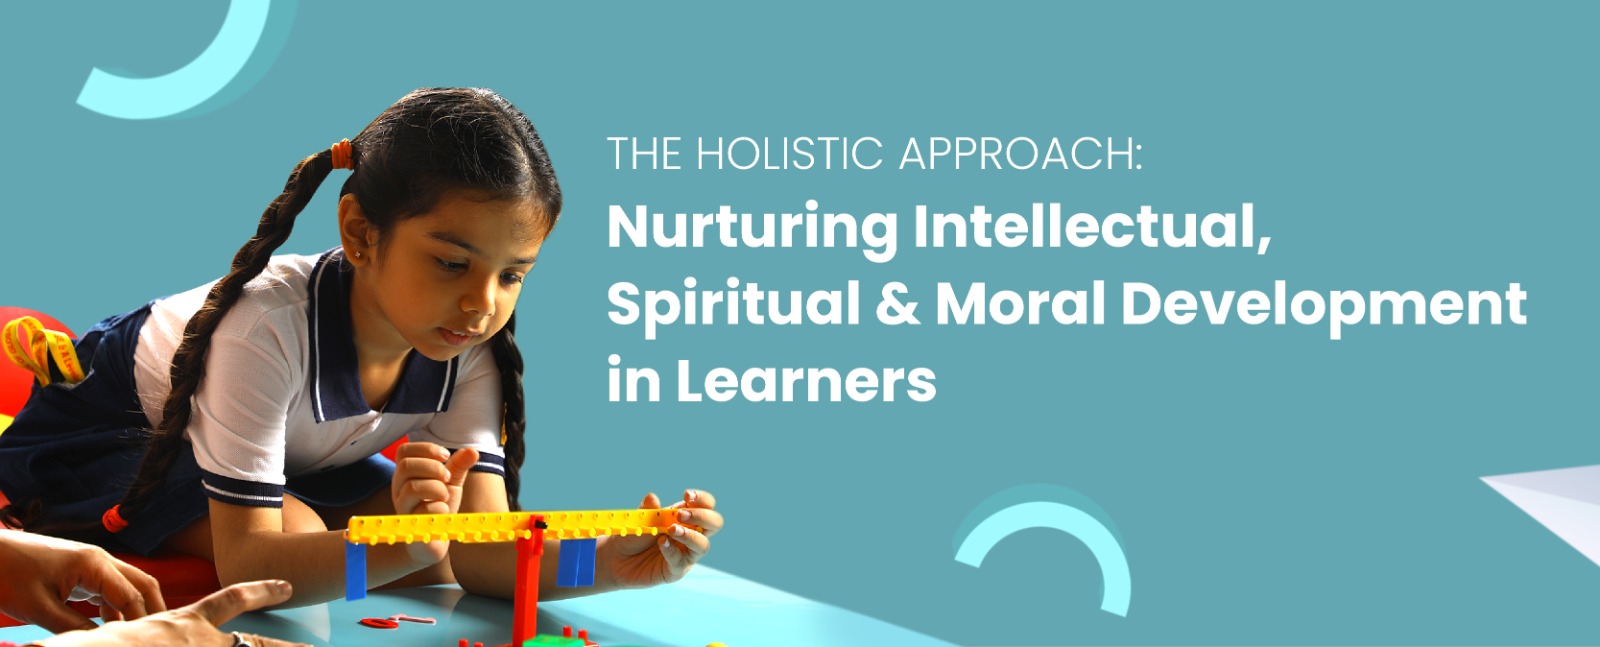 The Holistic Approach: Nurturing Intellectual, Spiritual, and Moral Development in Learners